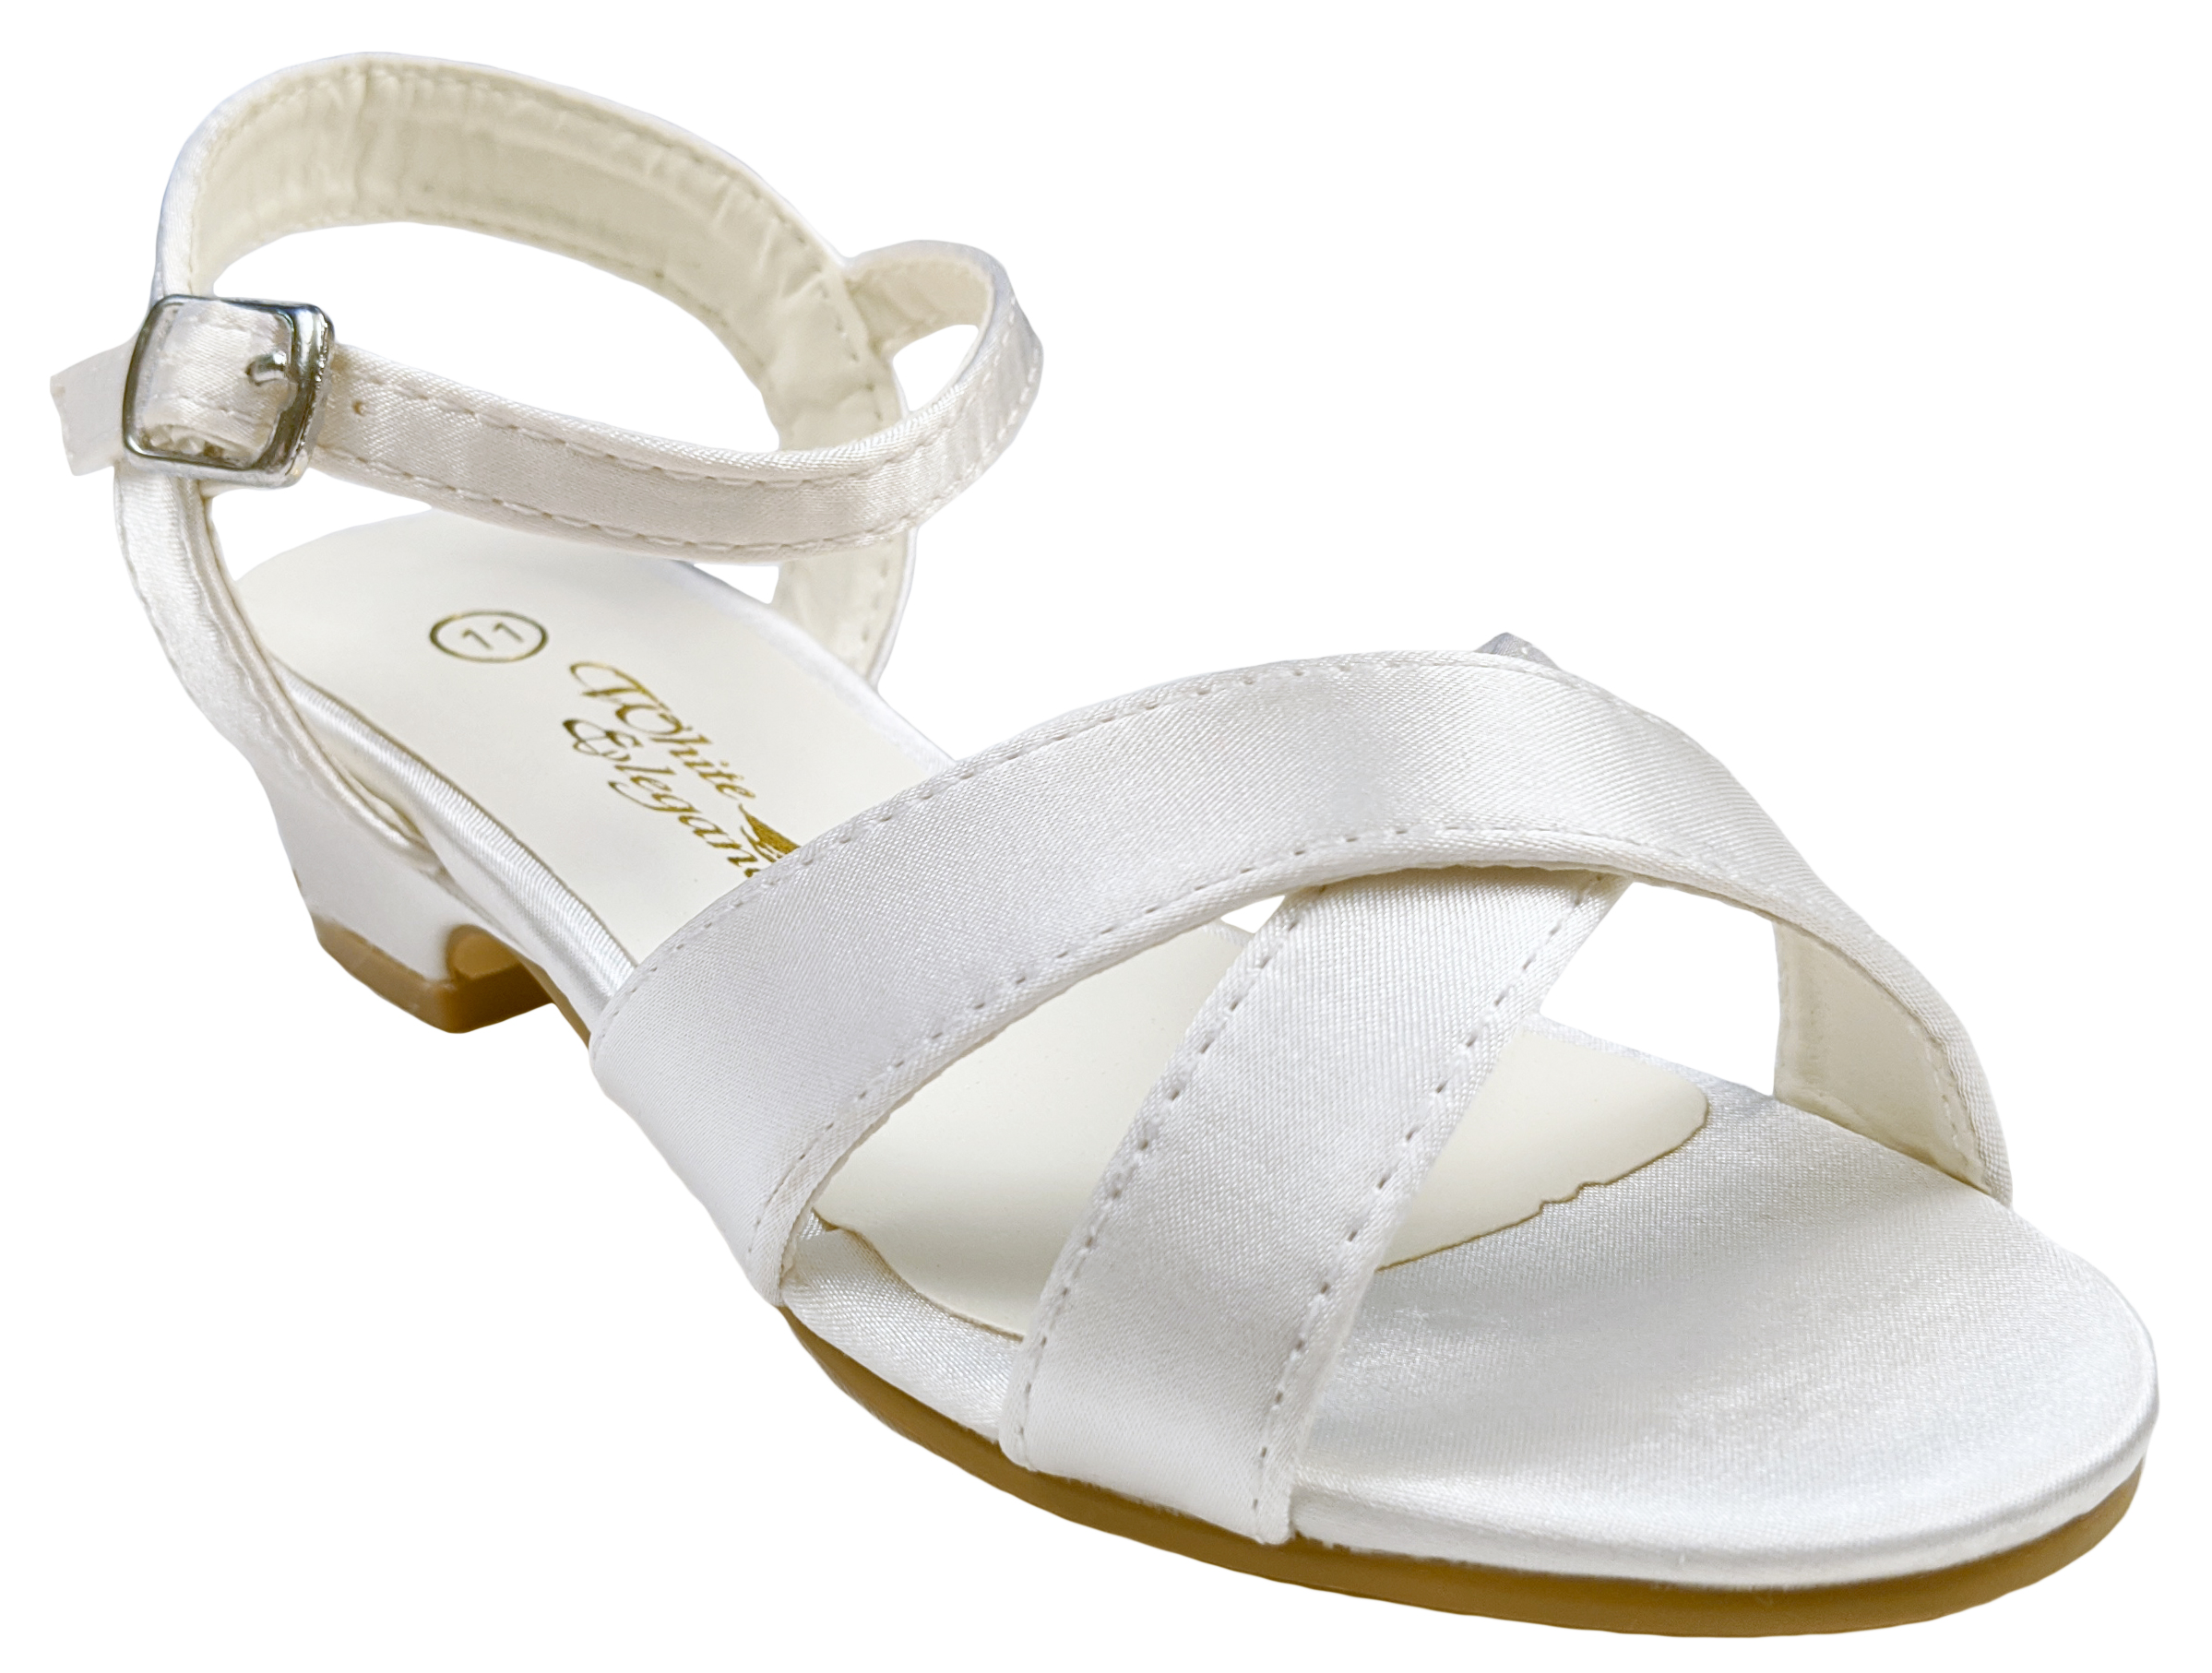 Little Things Mean A Lot Girls White Satin Dress Sandals with Heel (Little Girl, Big Girl) - image 1 of 6